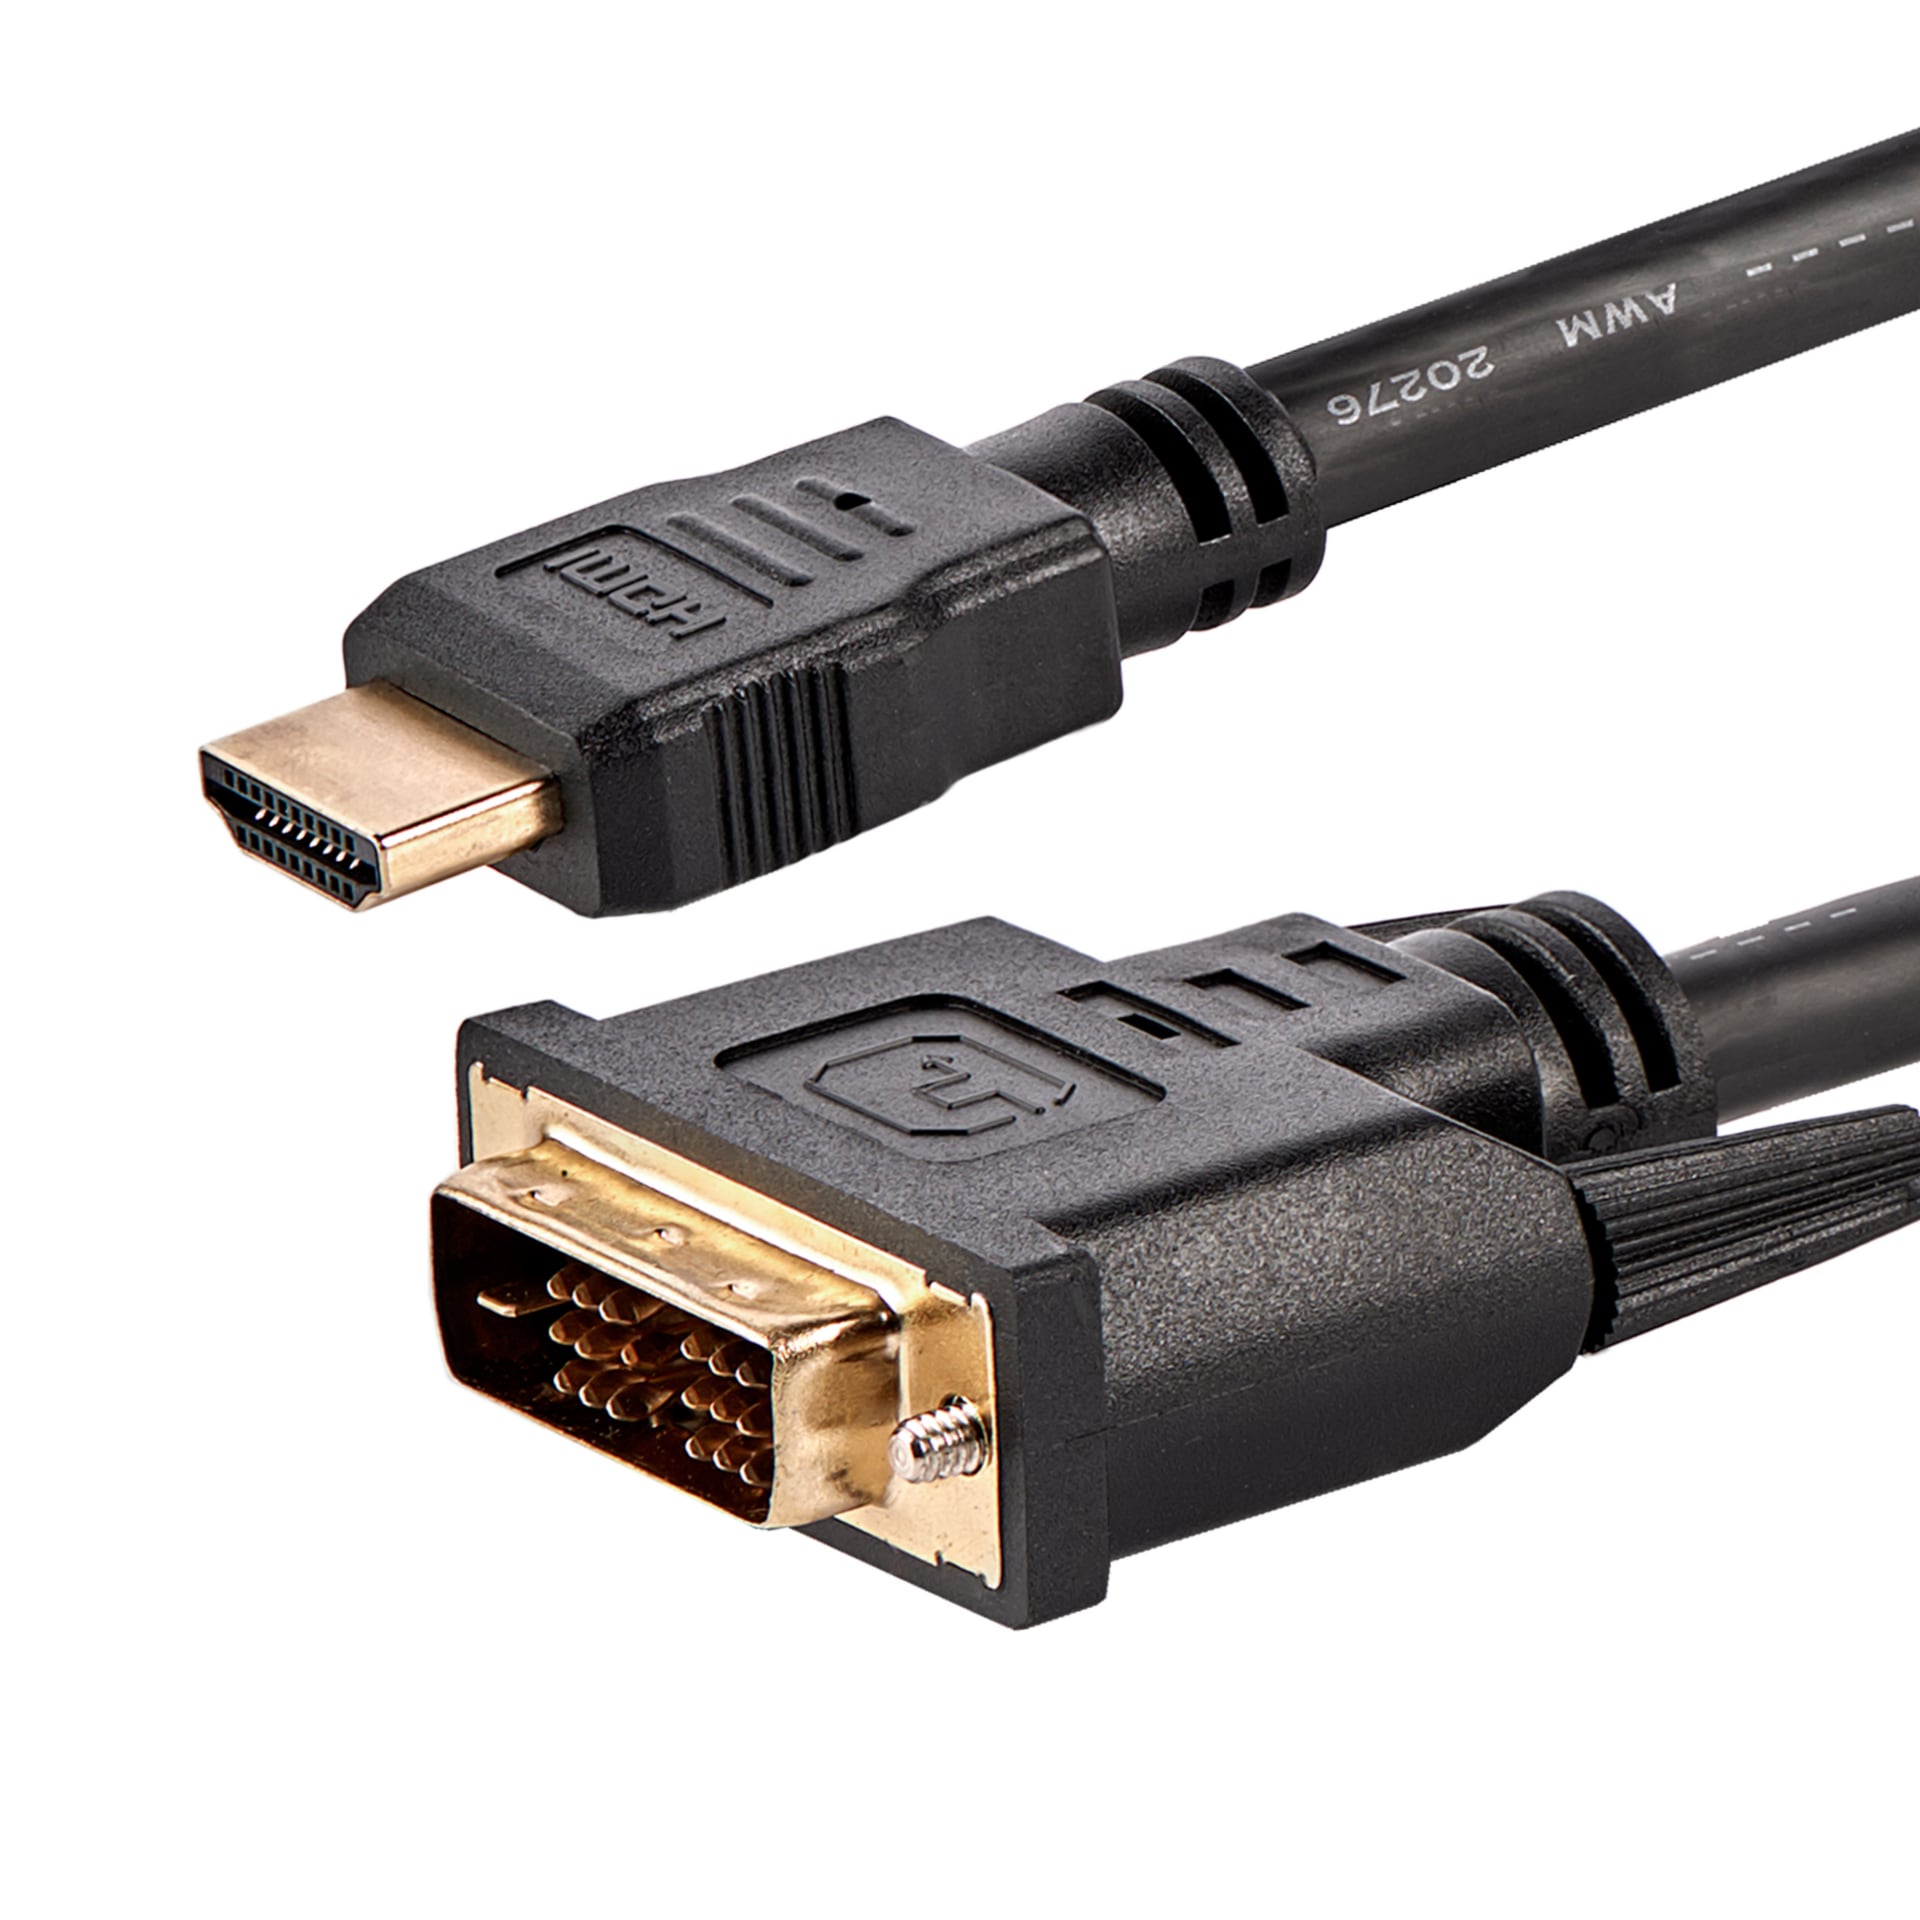 C-HM/DM HDMI to DVI Cable